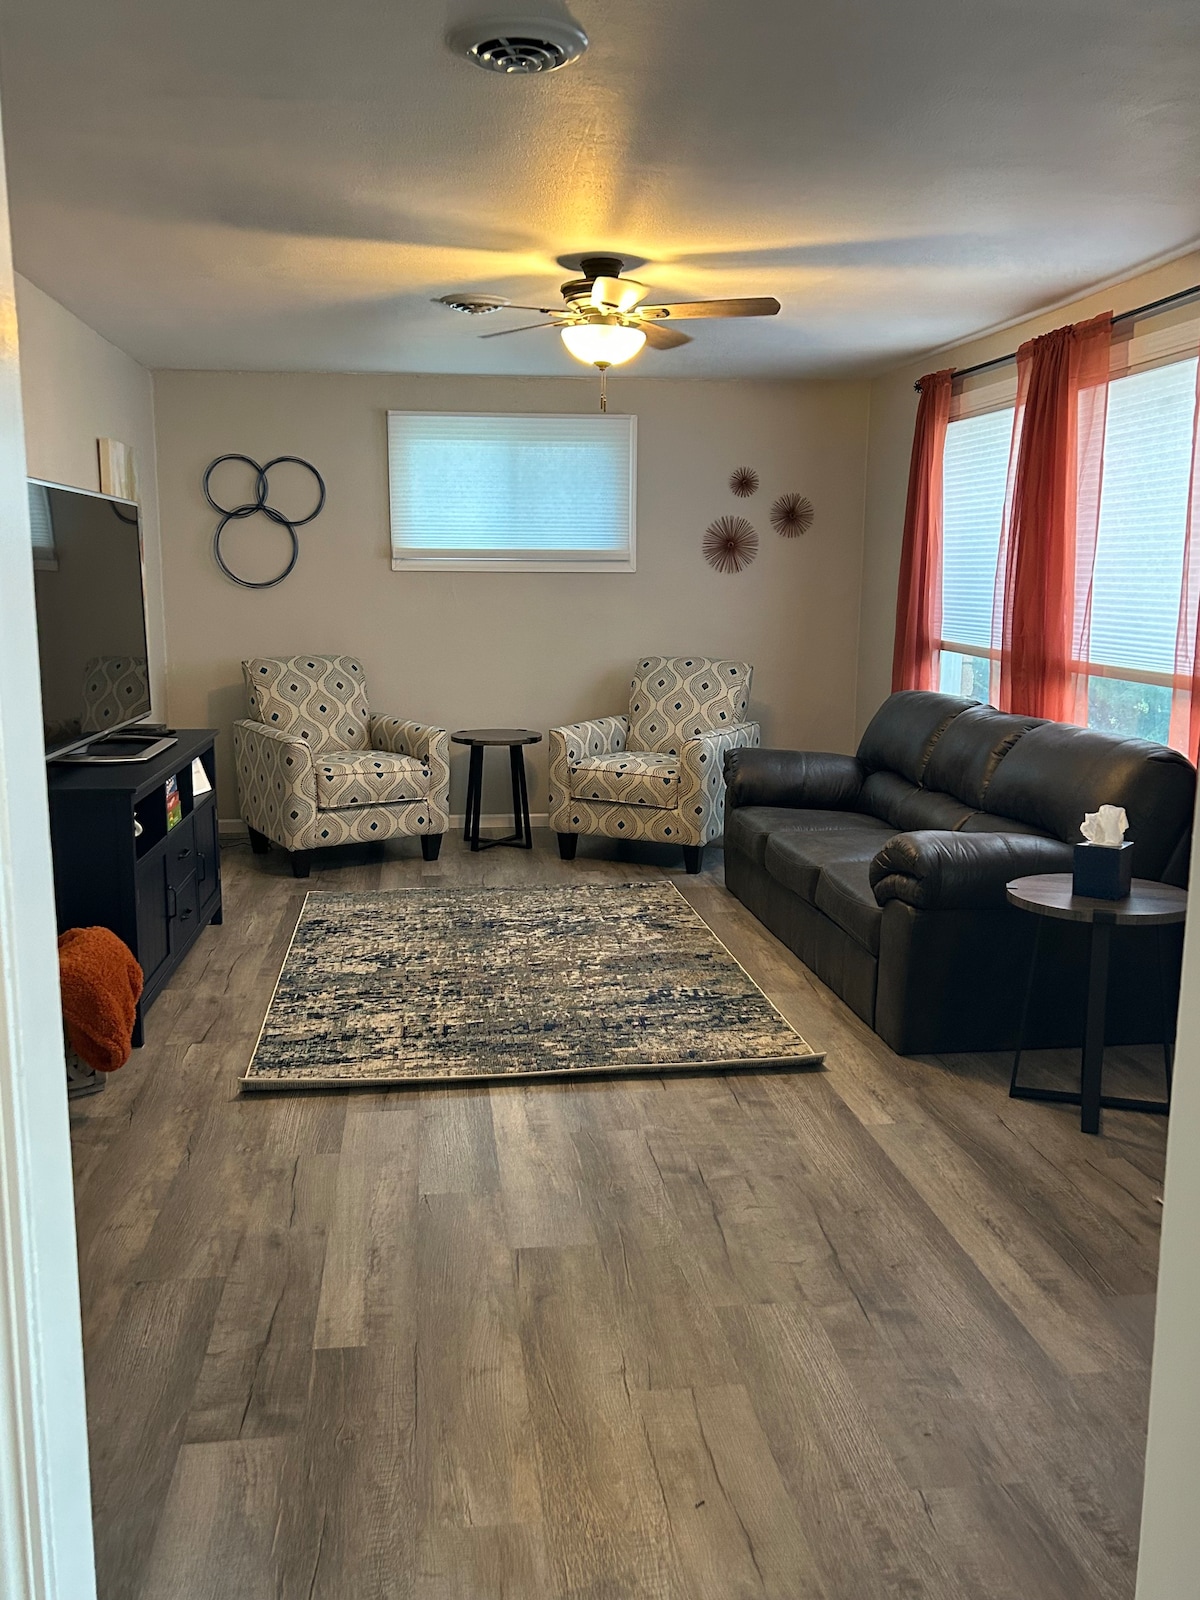 3bd 1ba home 1 mile from stadium